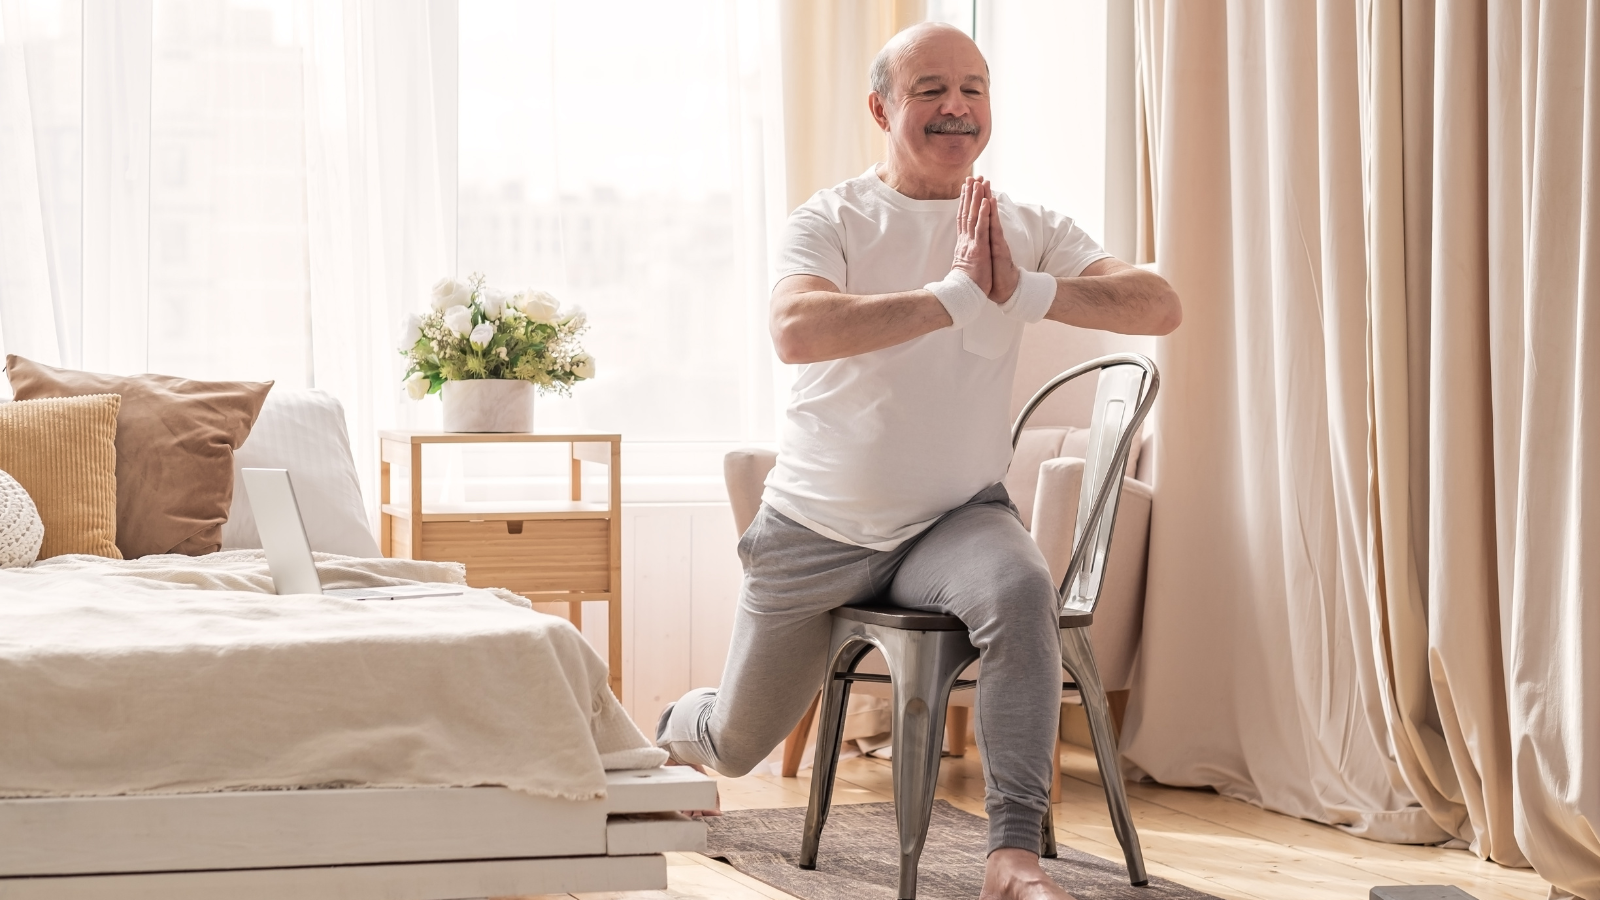 Online Chair Yoga can provide mental, physical and social benefits for seniors.